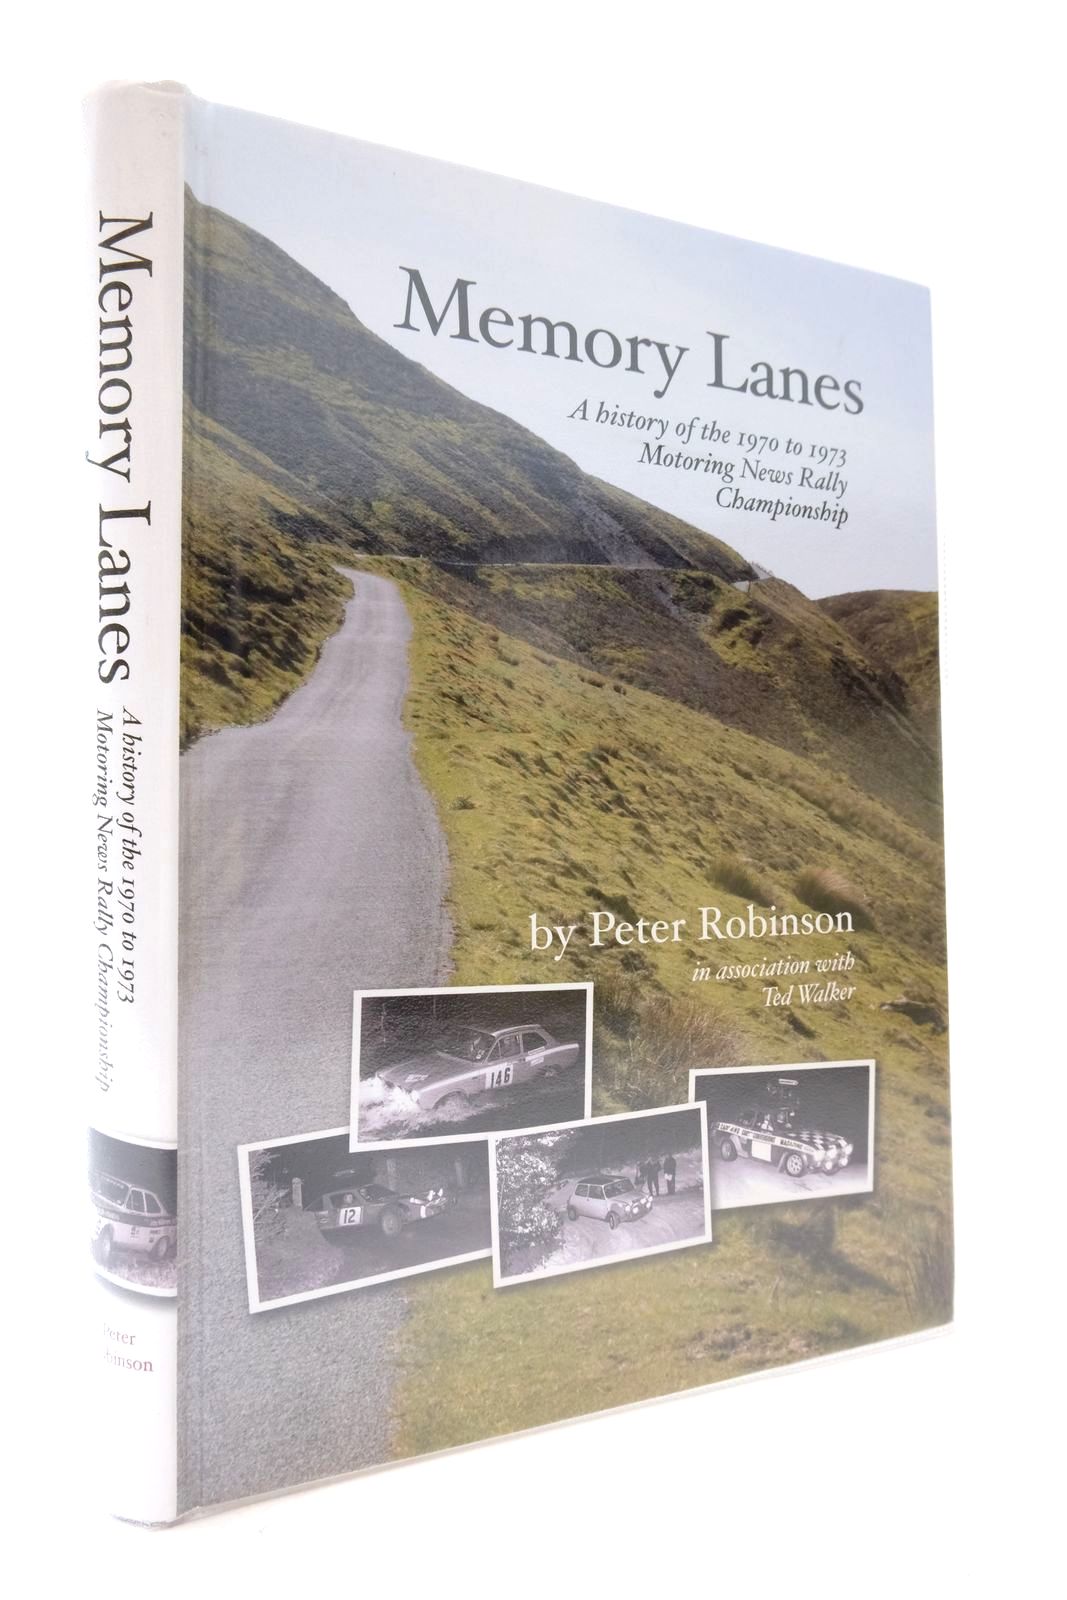 Photo of MEMORY LANES written by Robinson, Peter published by Writersworld (STOCK CODE: 2139597)  for sale by Stella & Rose's Books